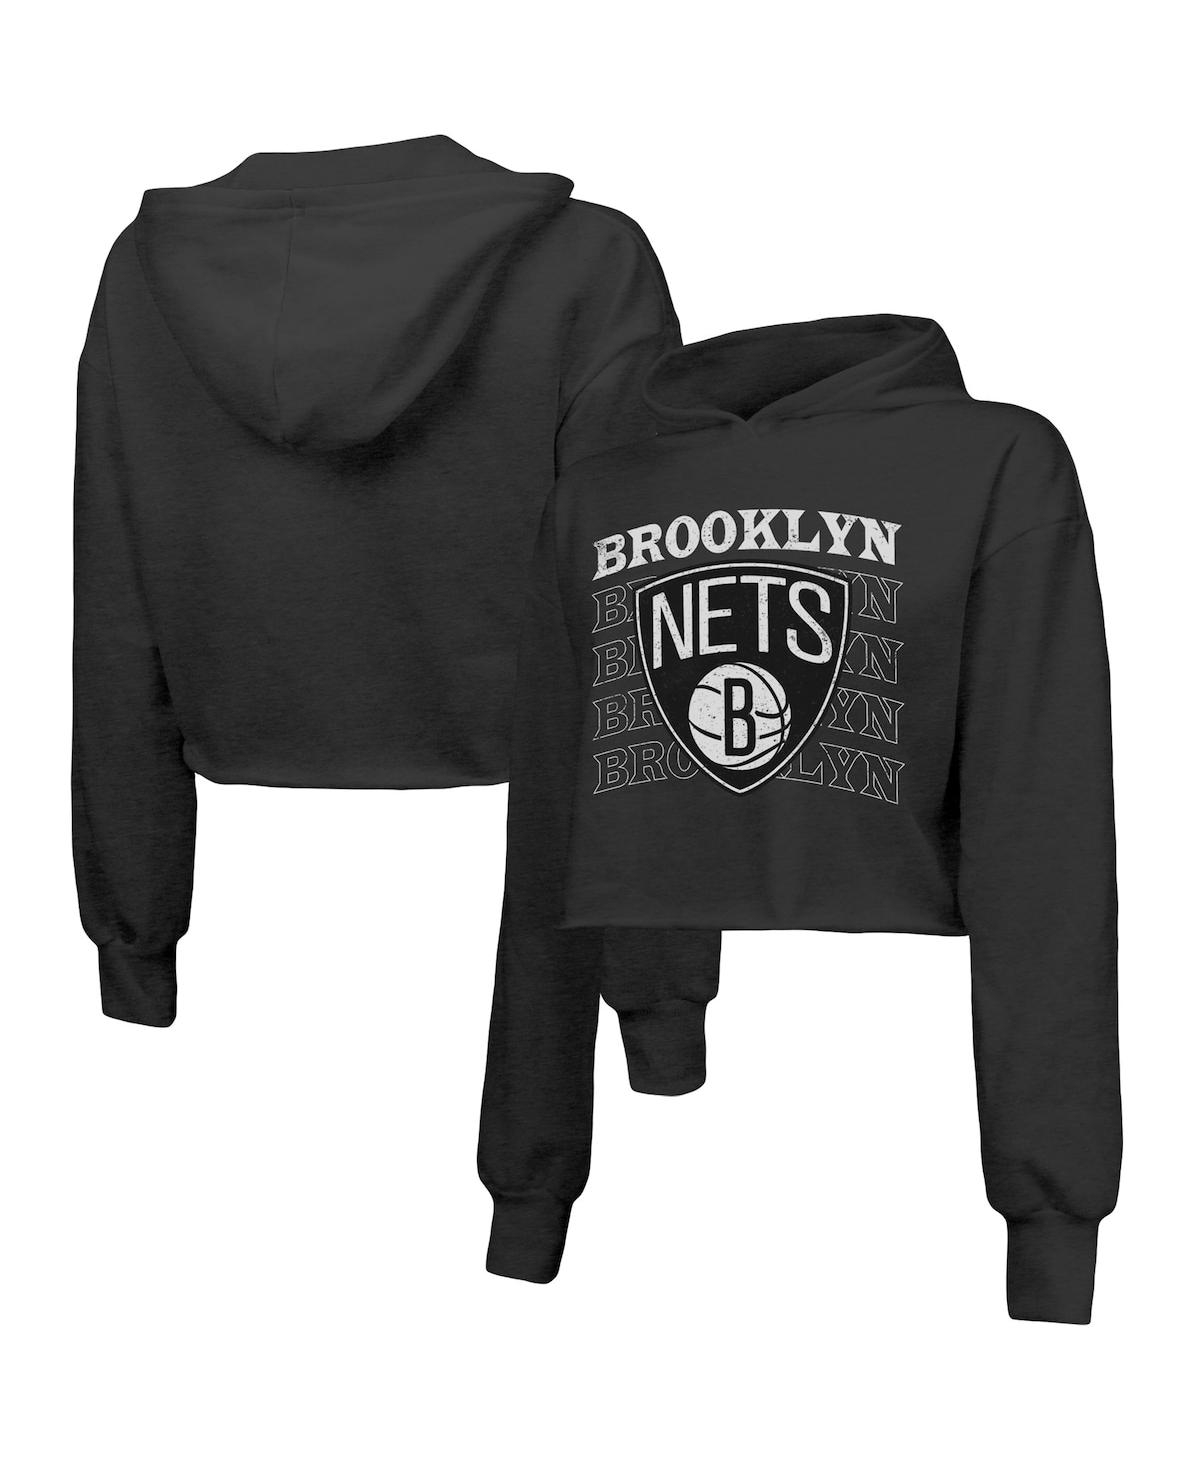 Women's Majestic Threads Black Brooklyn Nets Repeat Cropped Tri-Blend Pullover Hoodie - Black